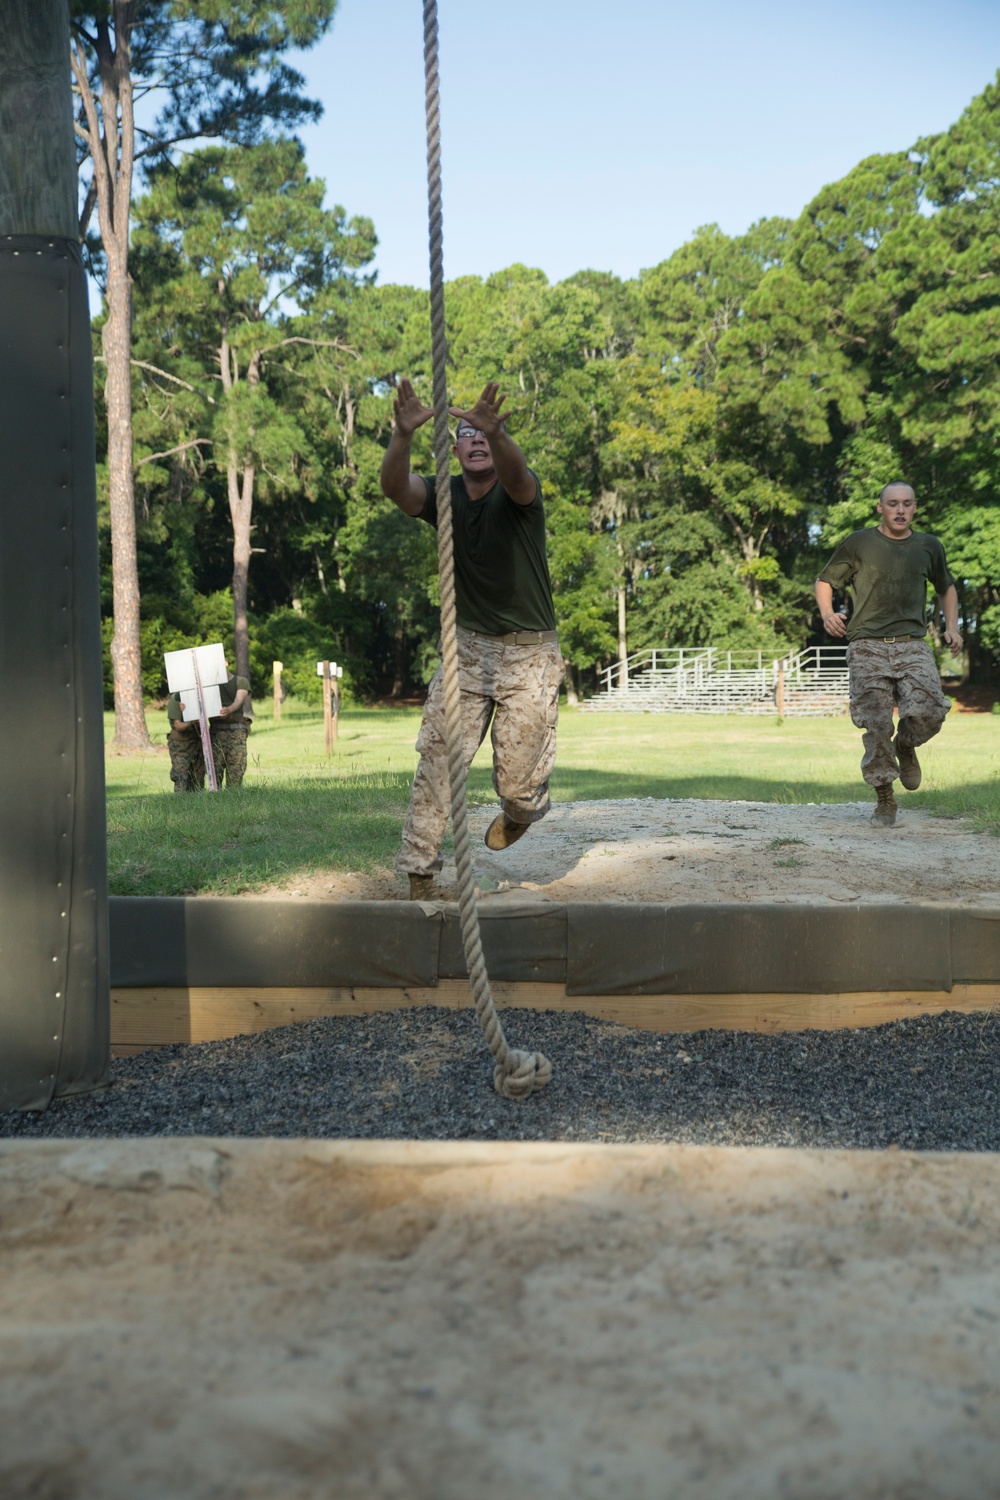 Marine recruits conquer physical, mental challenges on Parris Island